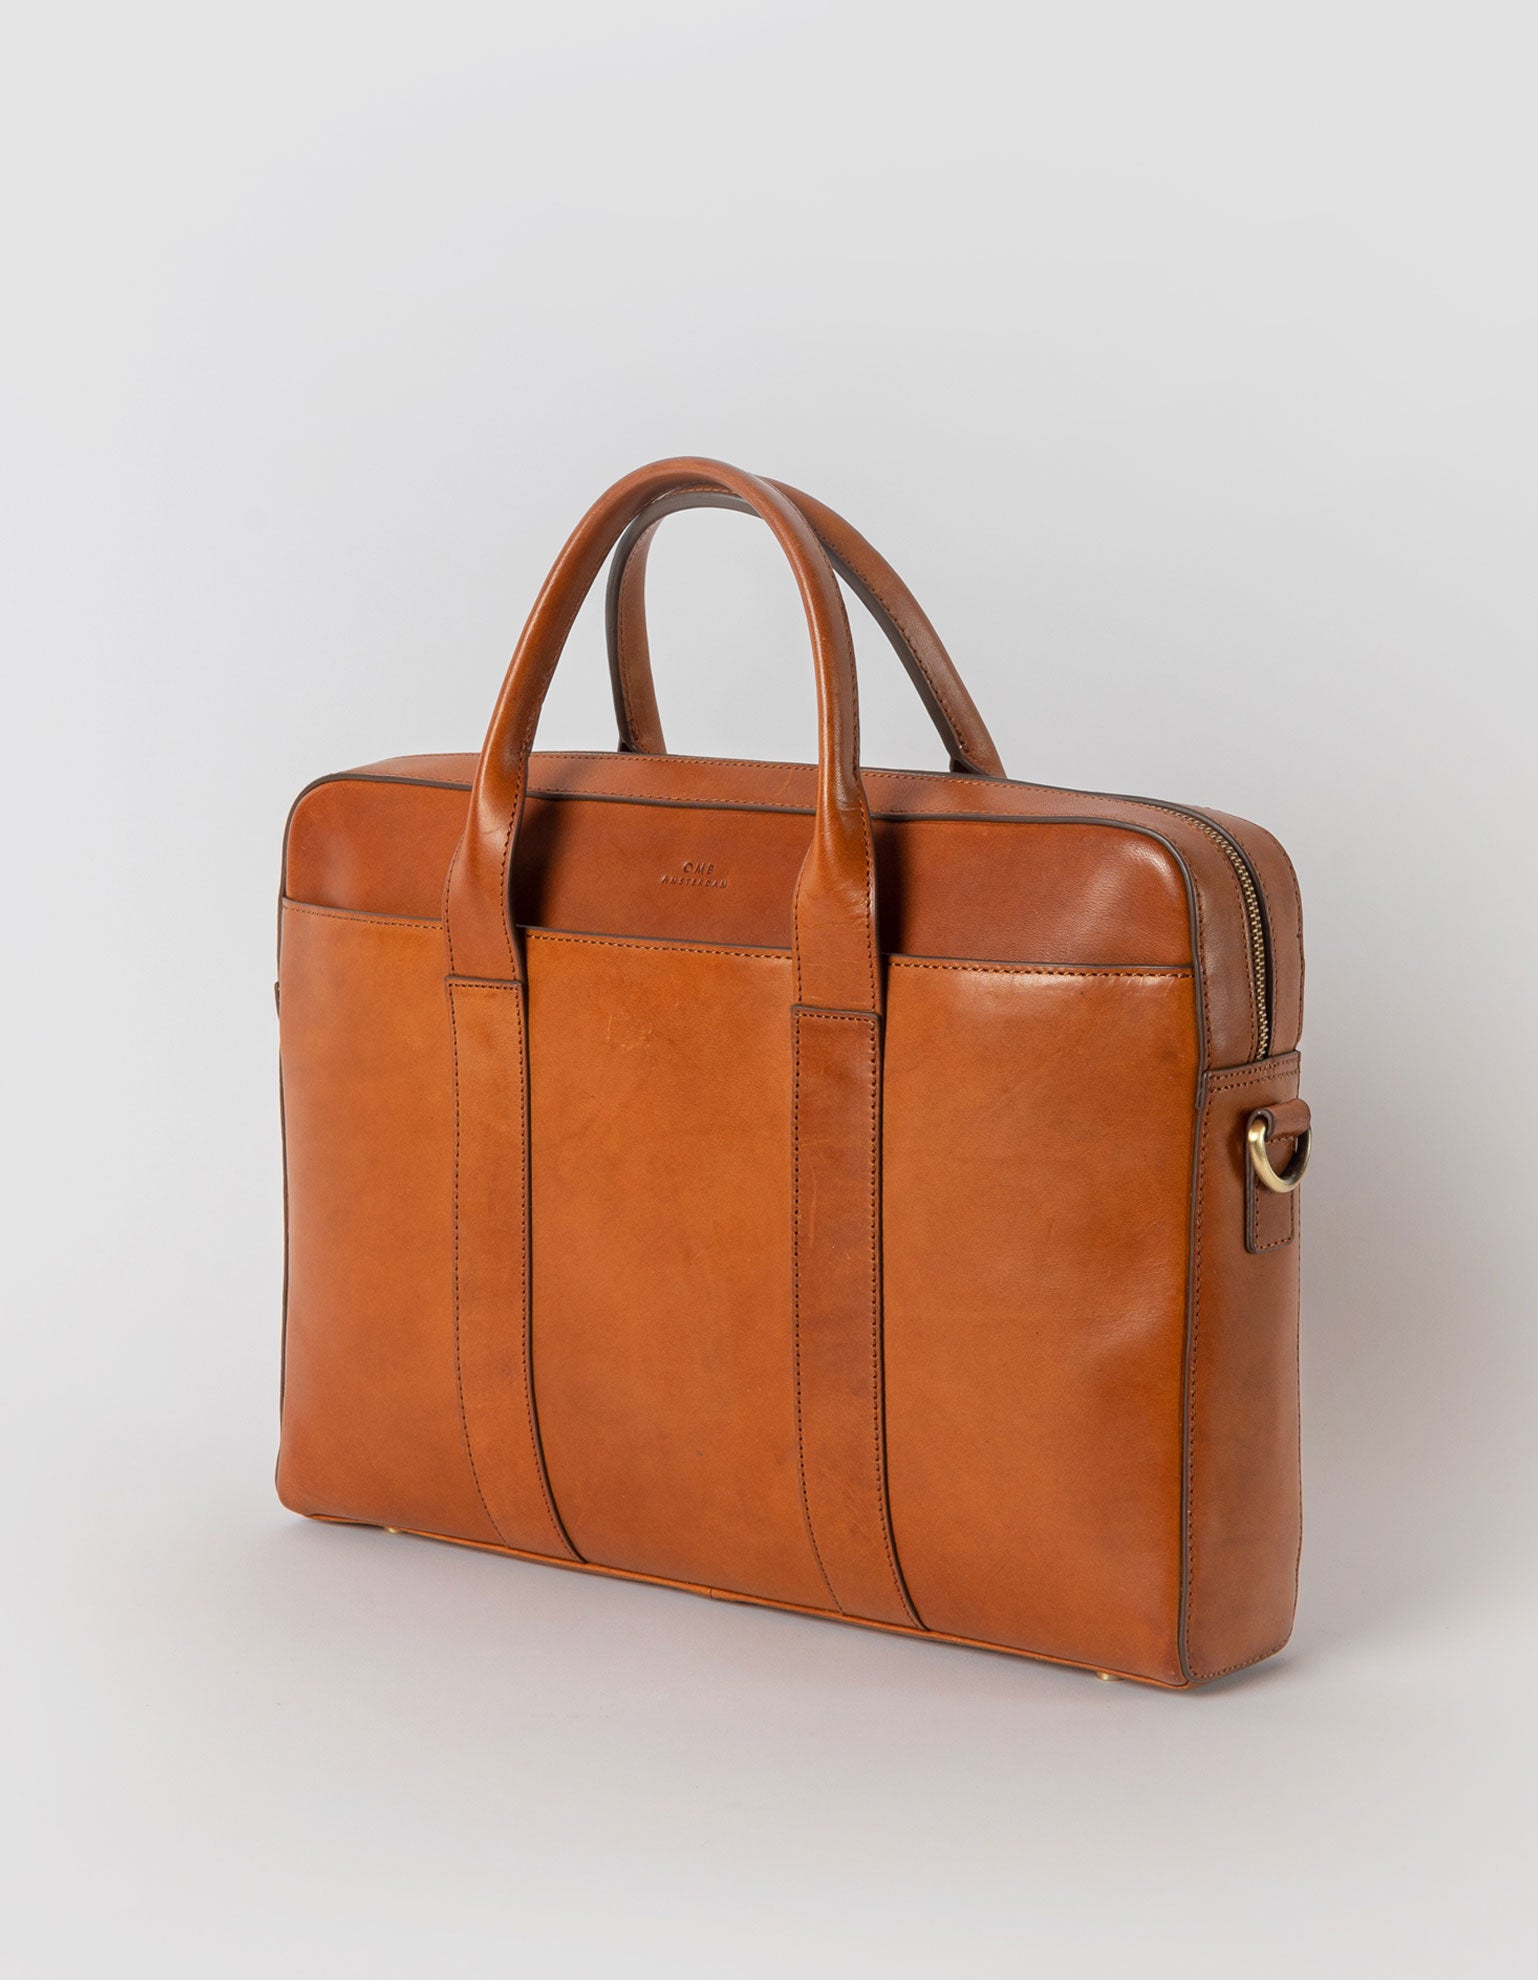 Harvey work bag in cognac classic leather. Side product image.